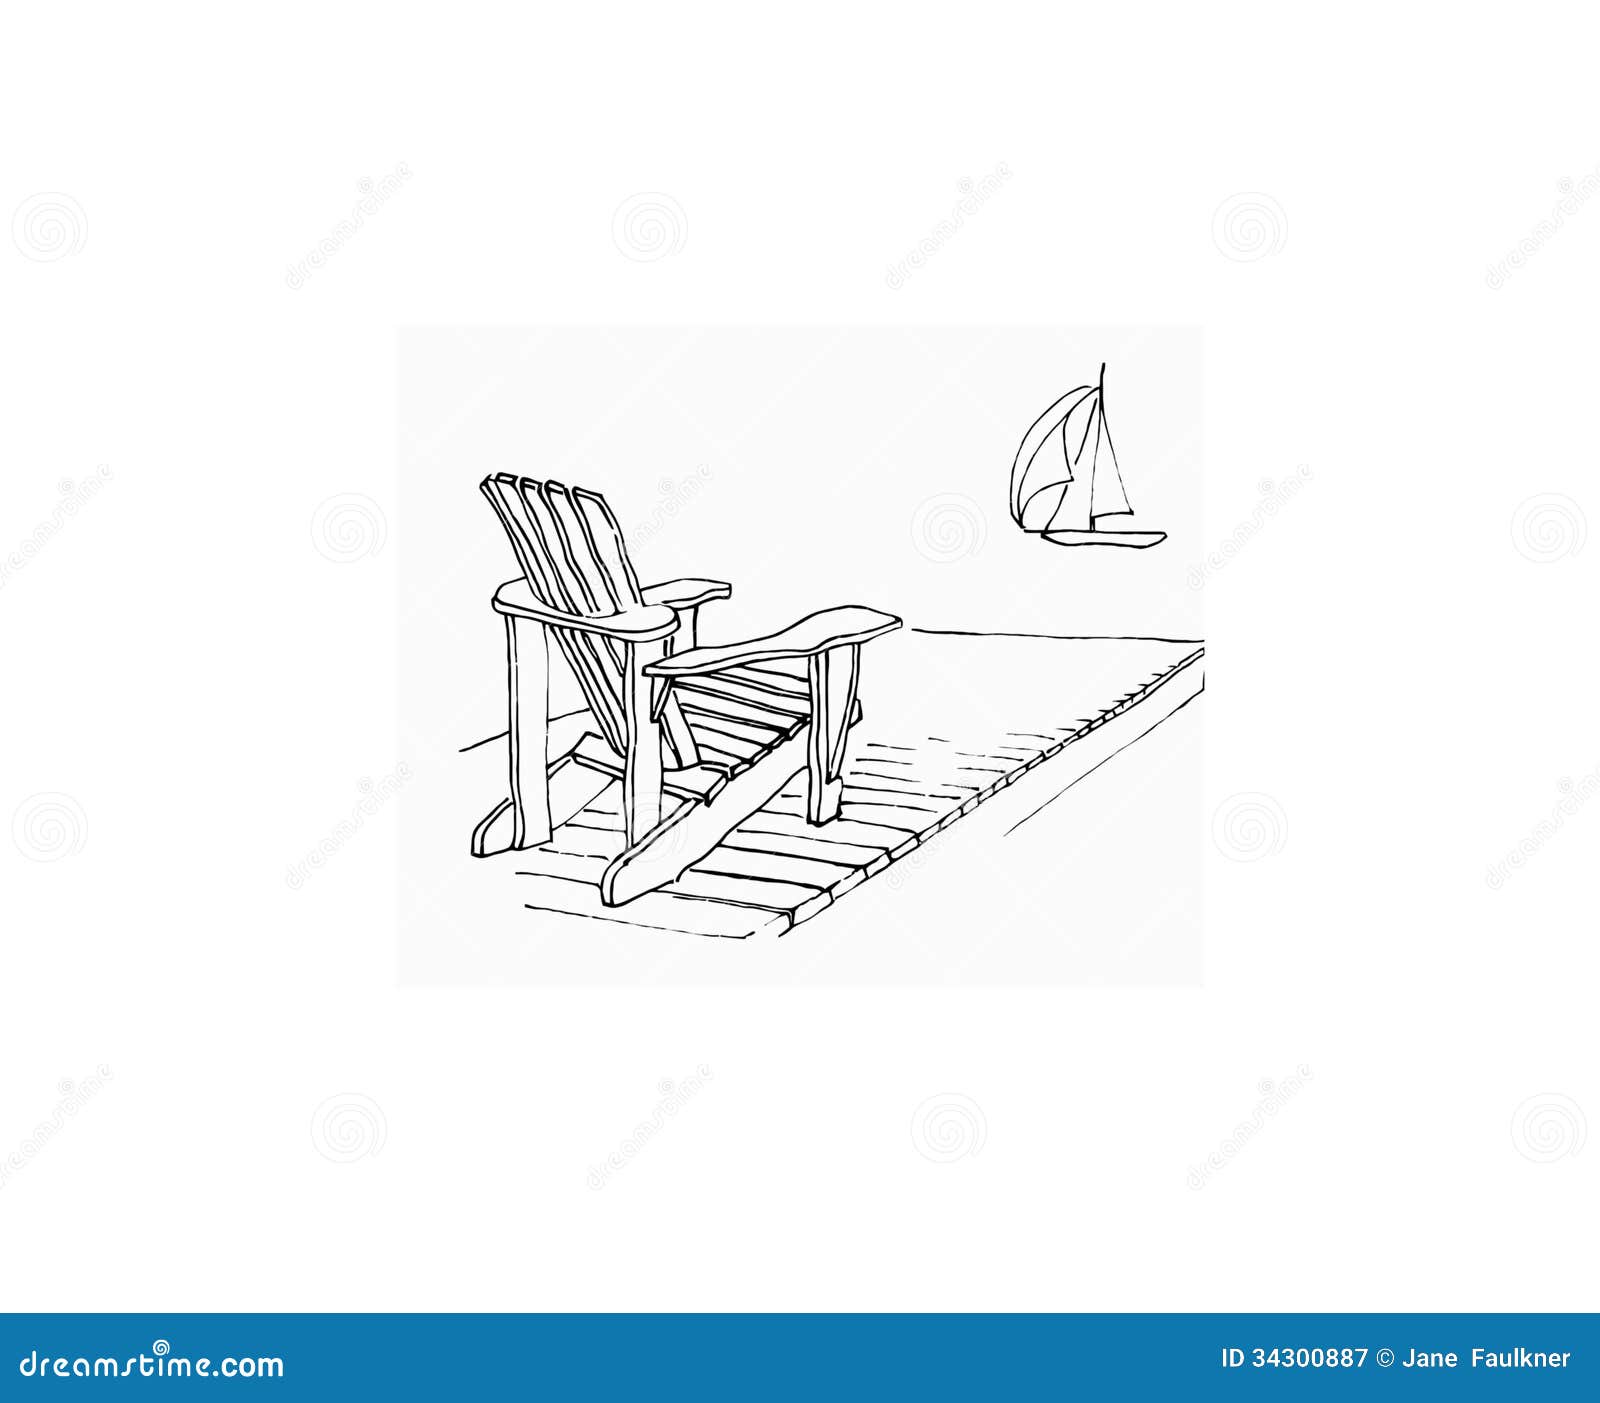 Simple hand drawn sketch of Adirondack chair on dock with sailing boat 